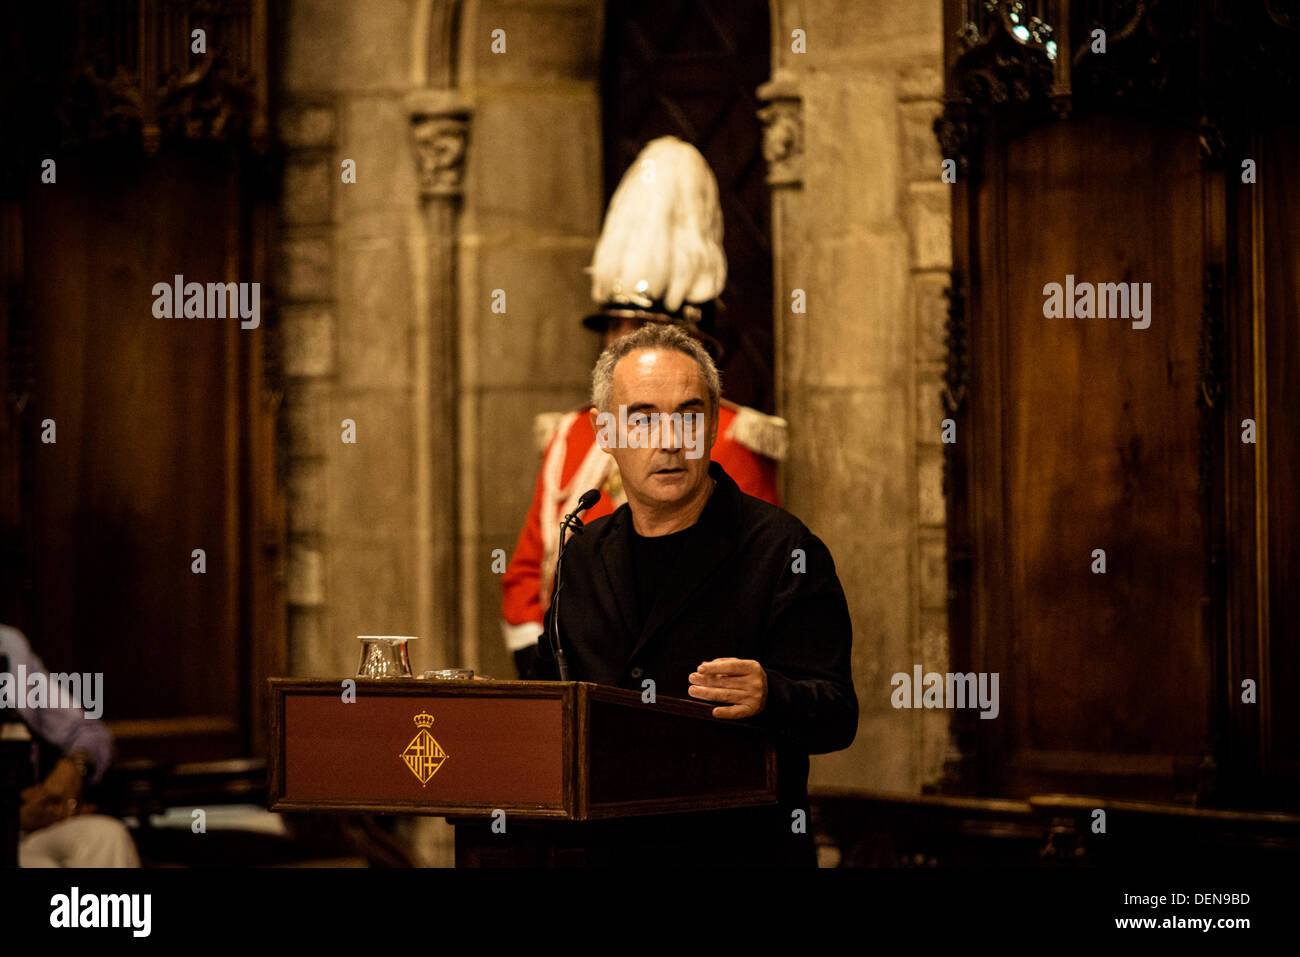 Barcelona, Spain. September 20th, 2013: Ferran Adria, famous Catalan star chef, speaks during the official initial act for the city festival in the council chamber to invited guests Credit:  matthi/Alamy Live News Stock Photo